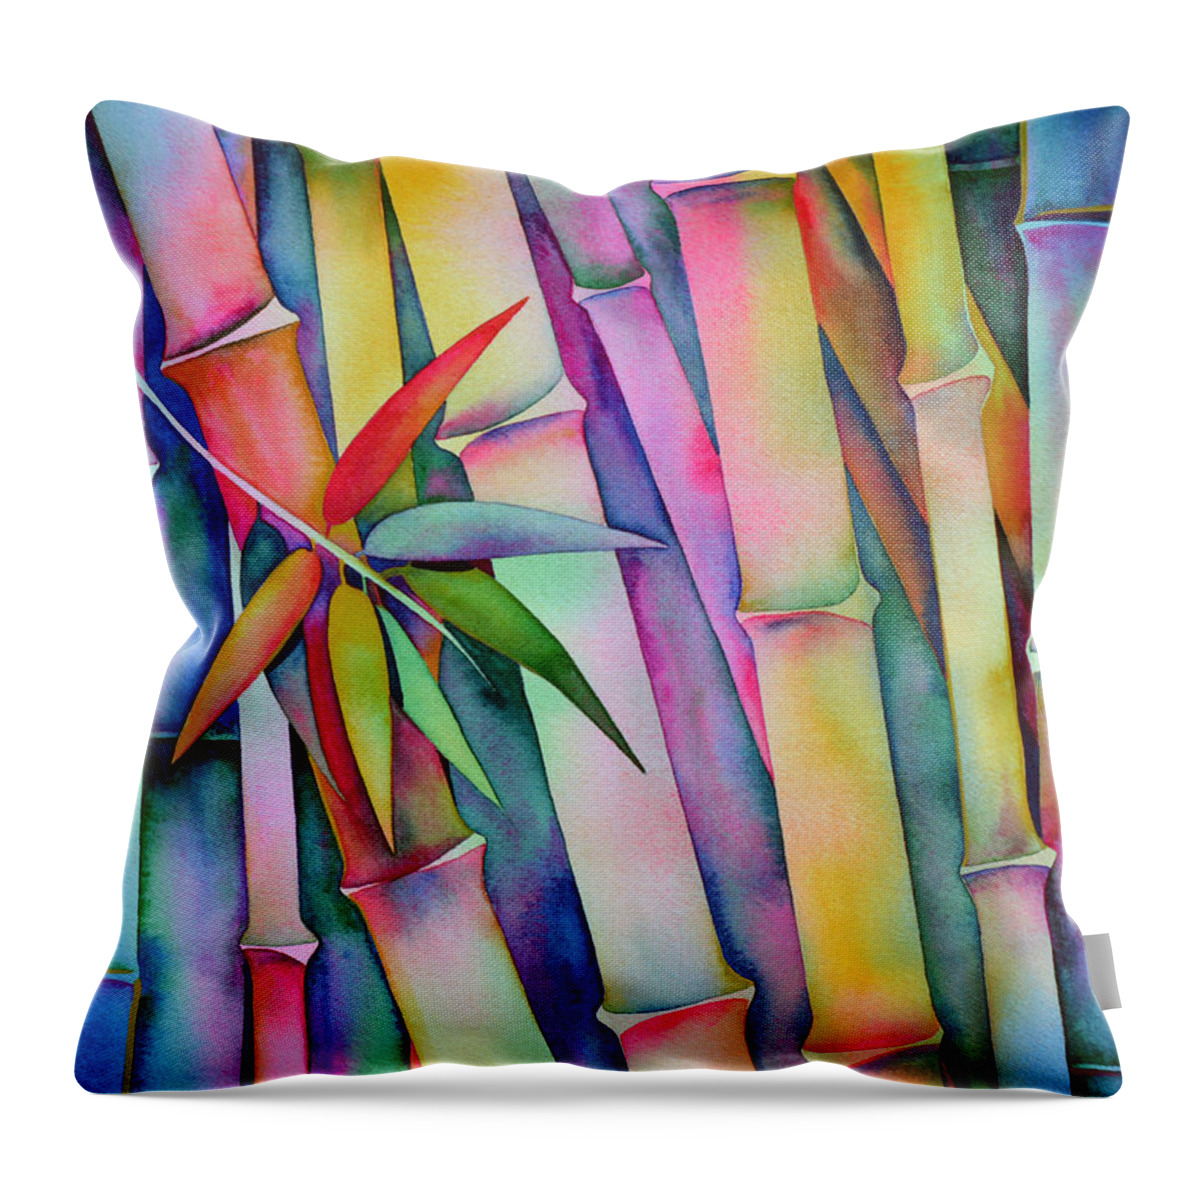 Bamboo Throw Pillow featuring the painting Seven Leaves of Bamboo by Zaira Dzhaubaeva